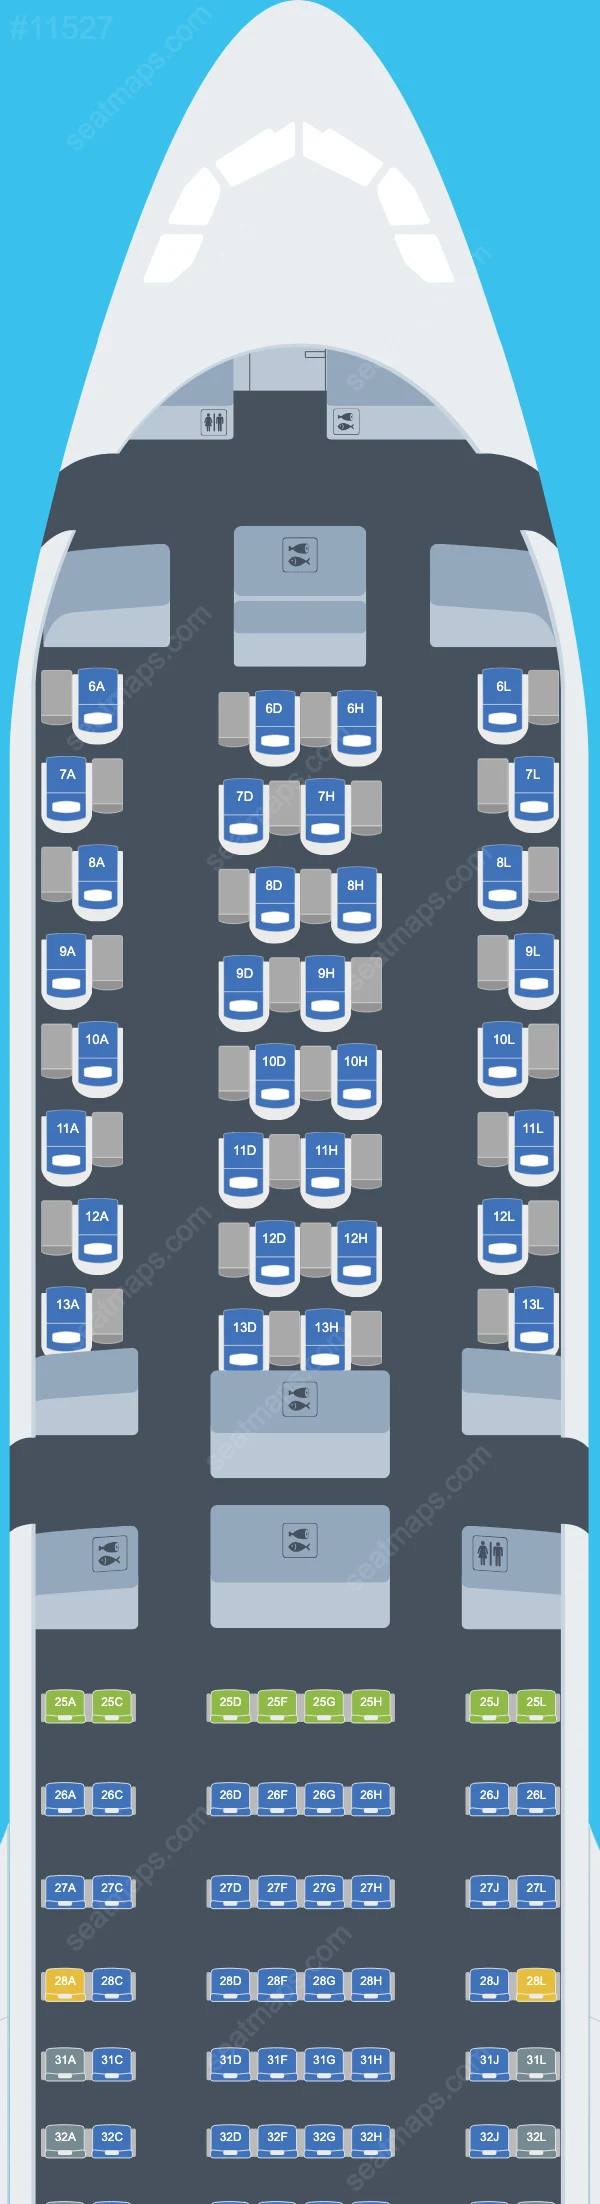 China Eastern Airbus A330-300 seatmap preview